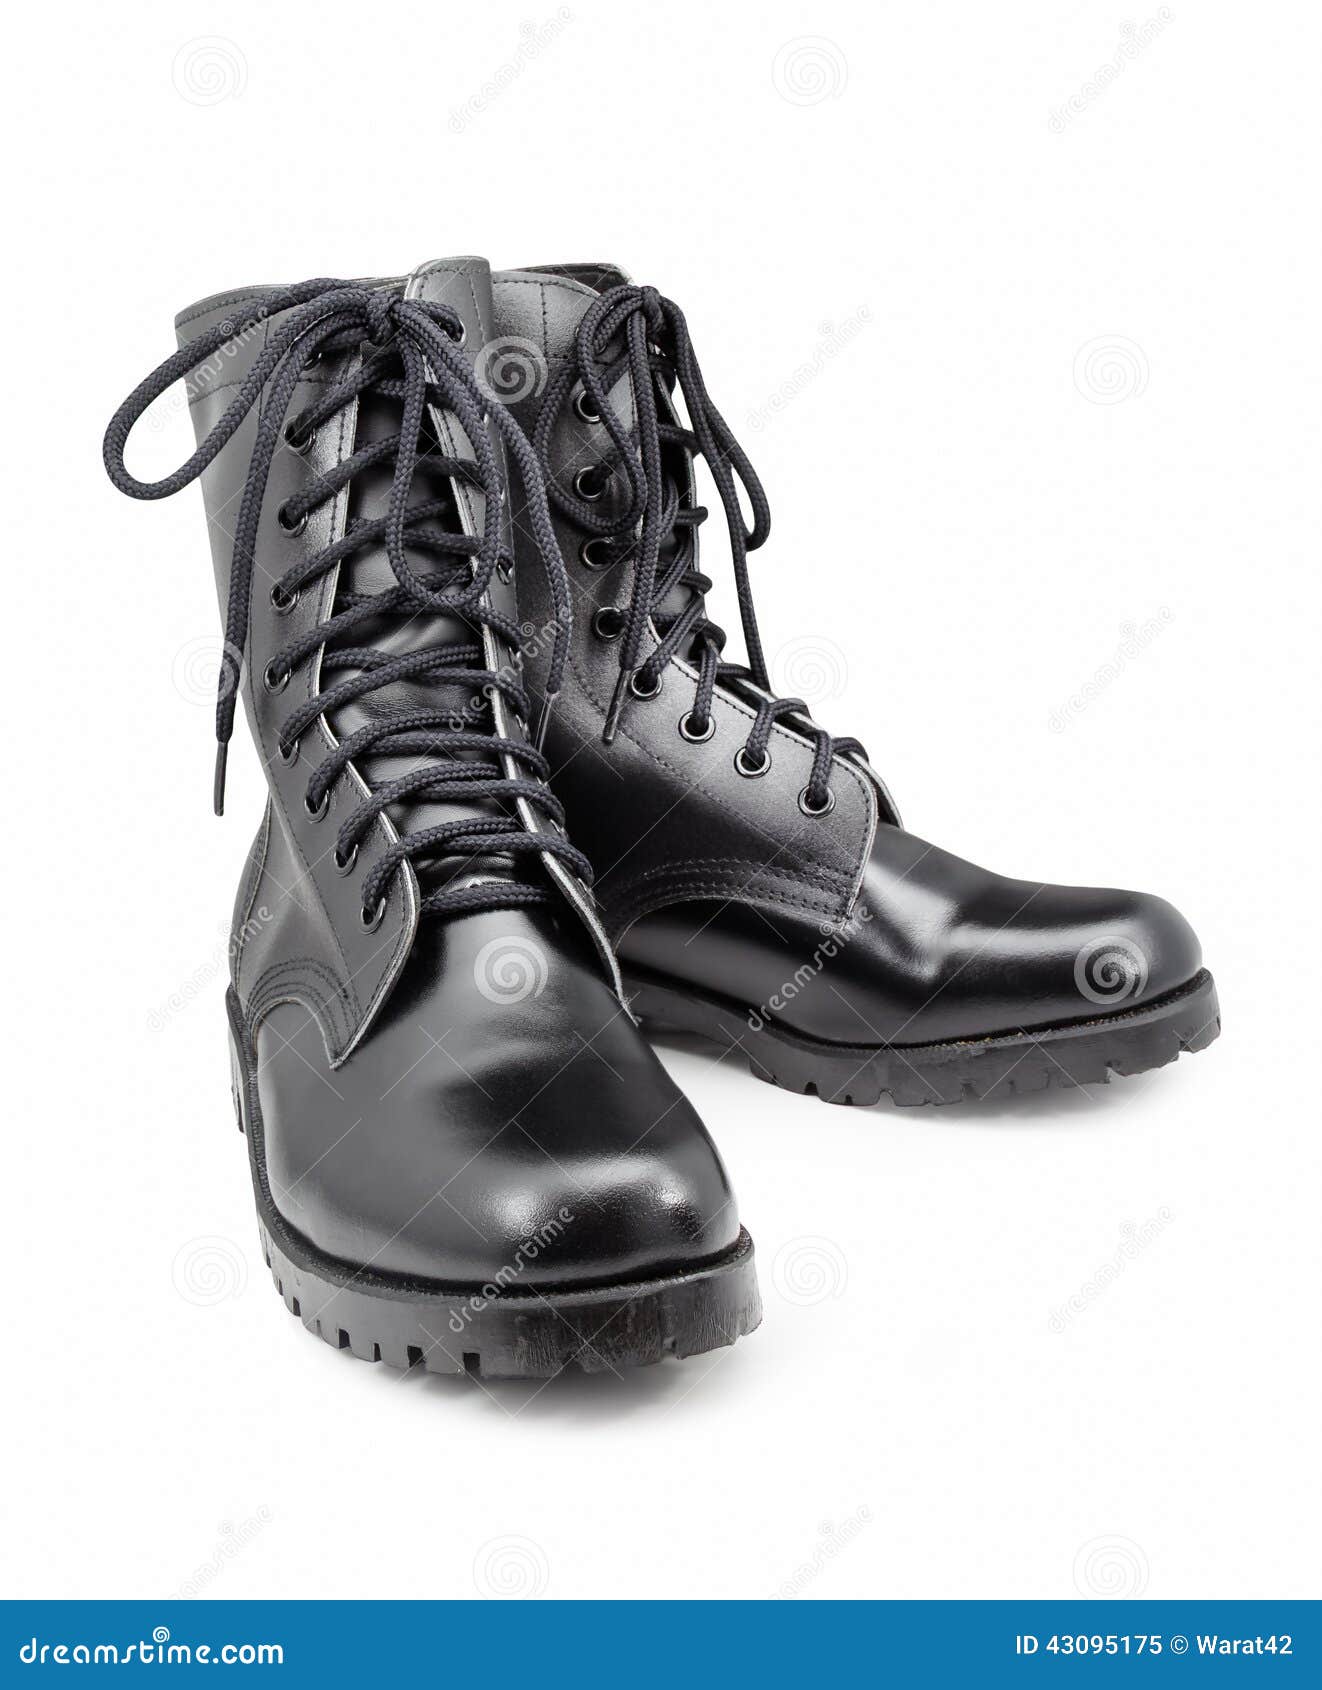 Black Army Shoes Isolated on White Backgrounds Stock Image - Image of ...